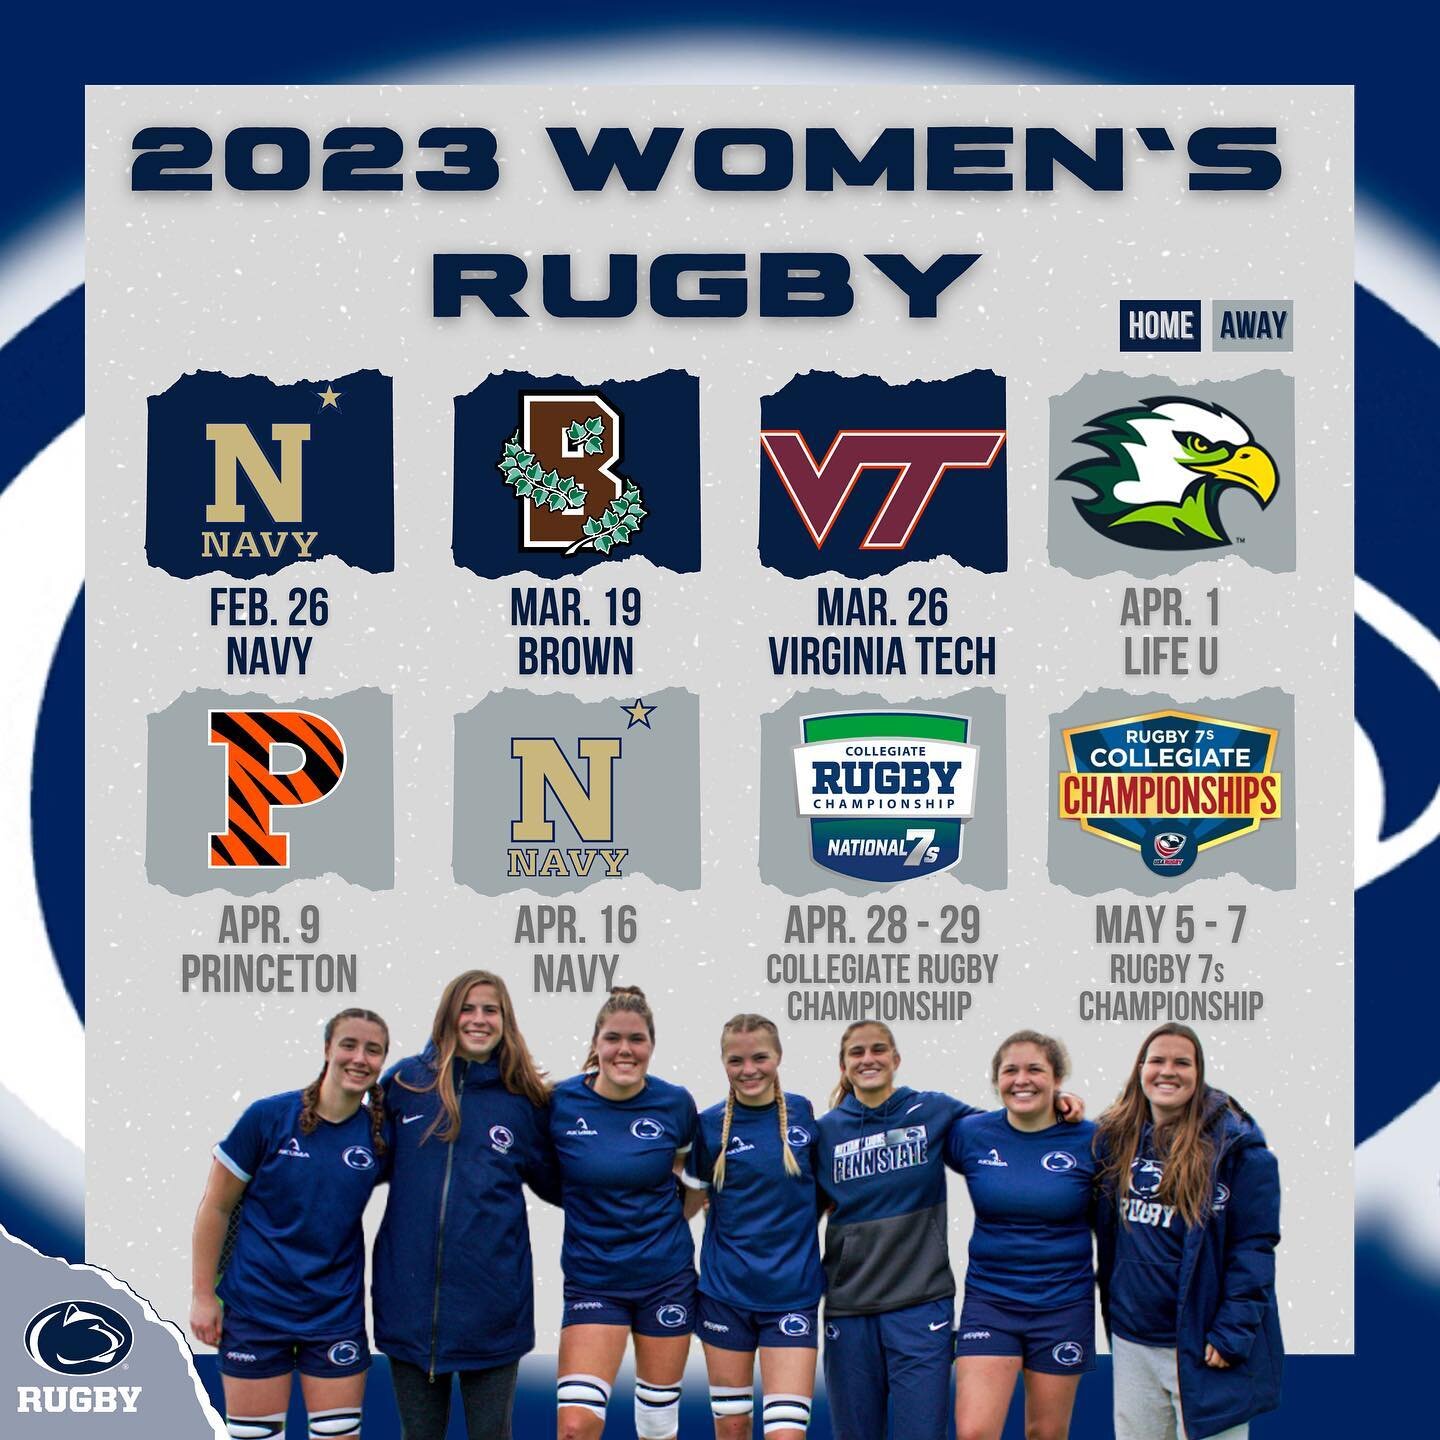 WE ARE back for Penn State rugby!! Mark your calendars and get ready for an exciting spring season! 😤🗓️🏉